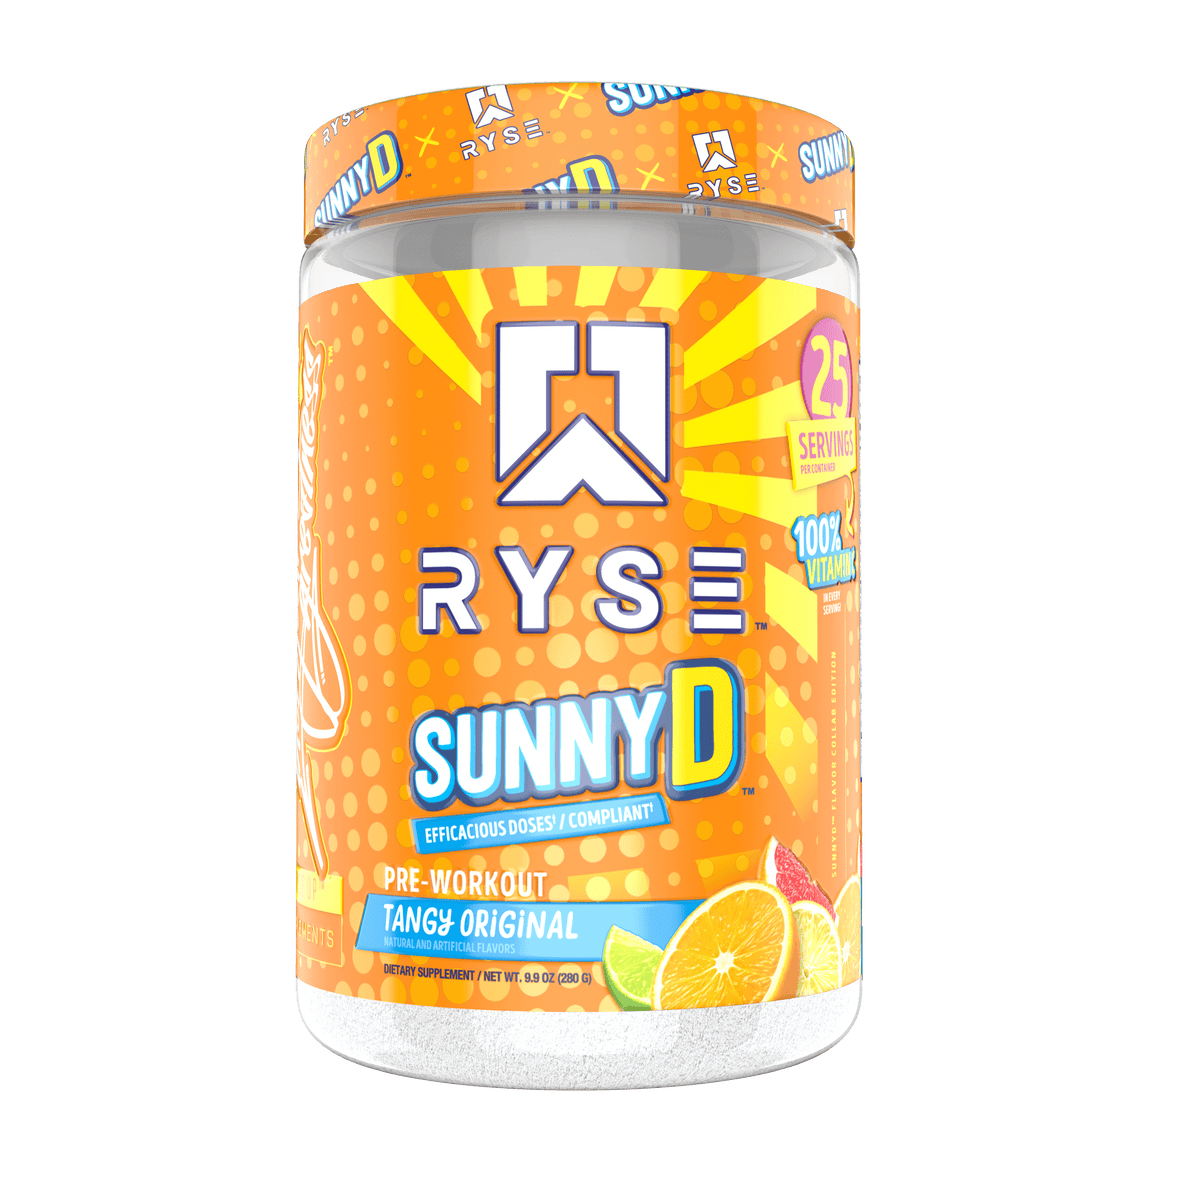 Ryse Supplements Pre-Workout - A1 Supplements Store